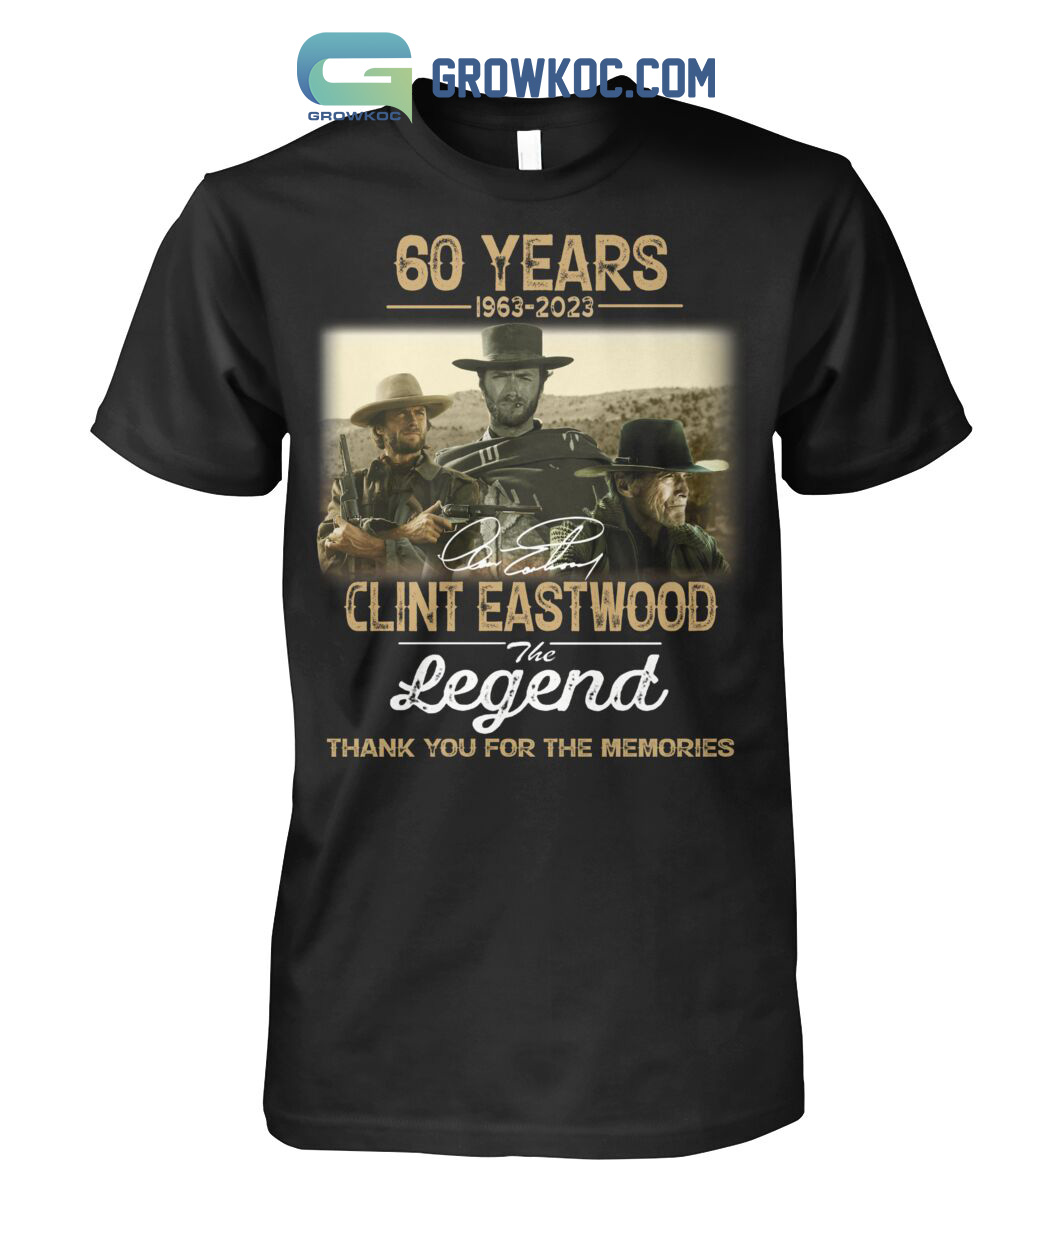 Clint Eastwood 60 Years 1963-2023 The Legend Shirt